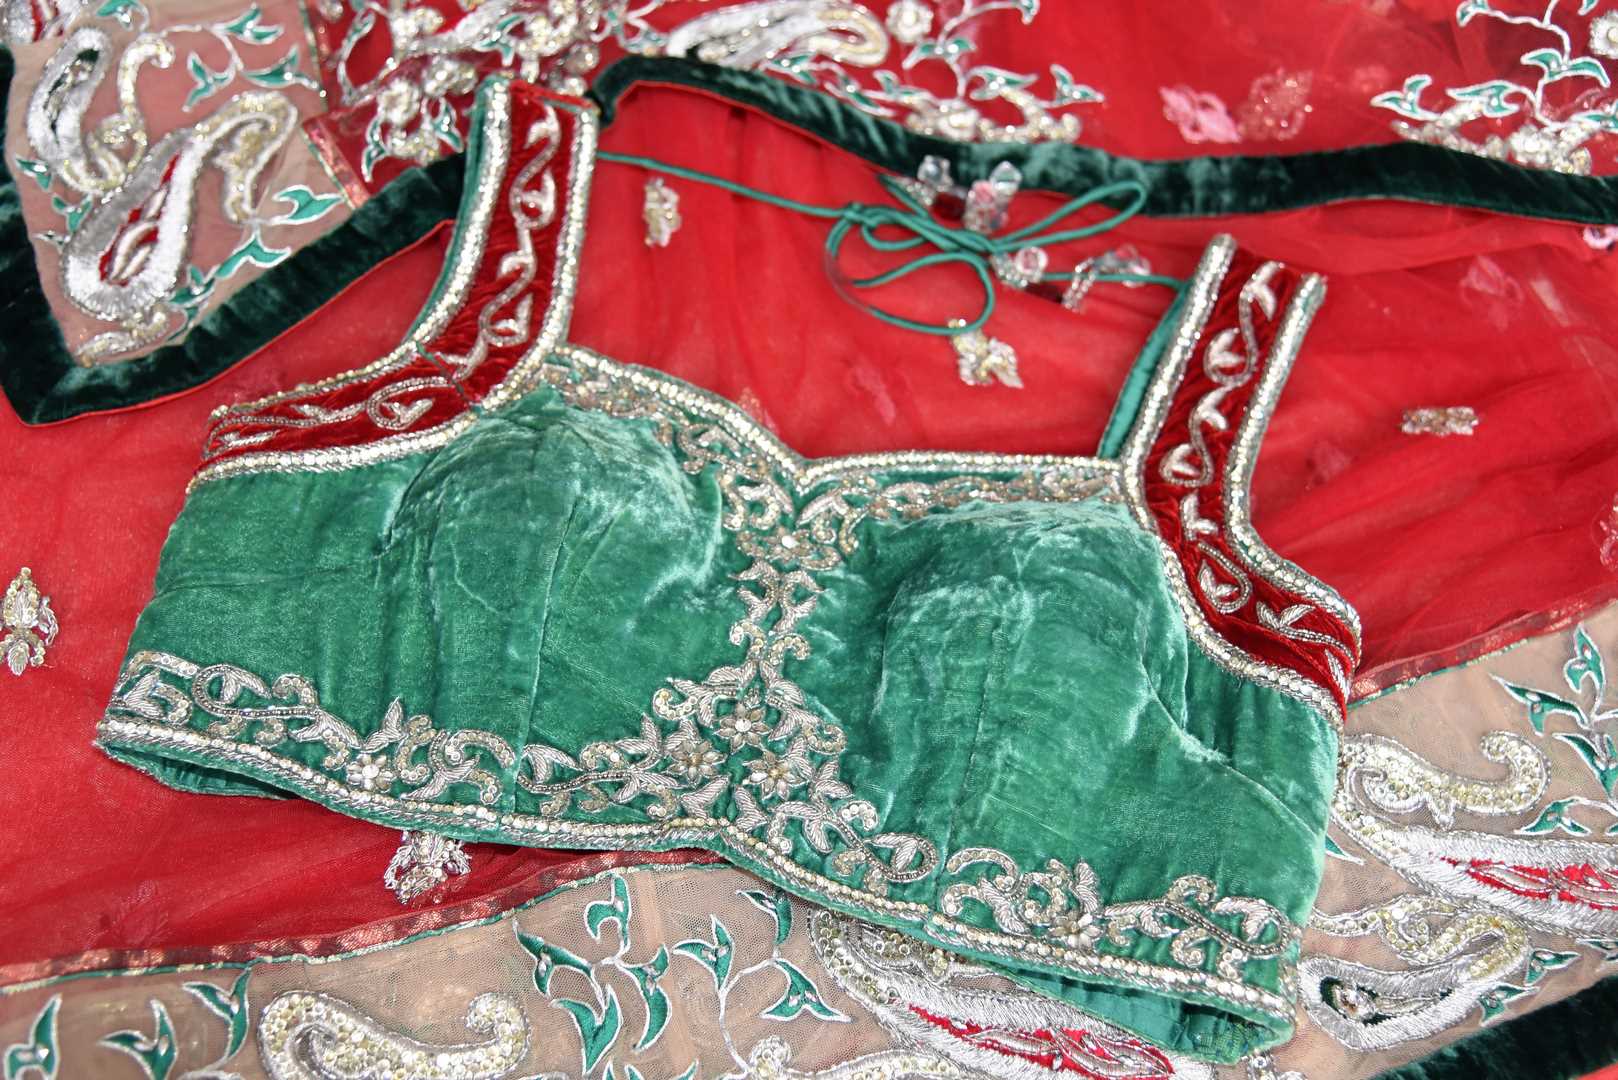 Buy red net saree online in USA with green embroidered border and saree blouse from Pure Elegance. Let your ethnic style be one of a kind with an exquisite variety of Indian designer sarees, pure silk sarees, Bollywood sarees from our exclusive fashion store in USA.-details